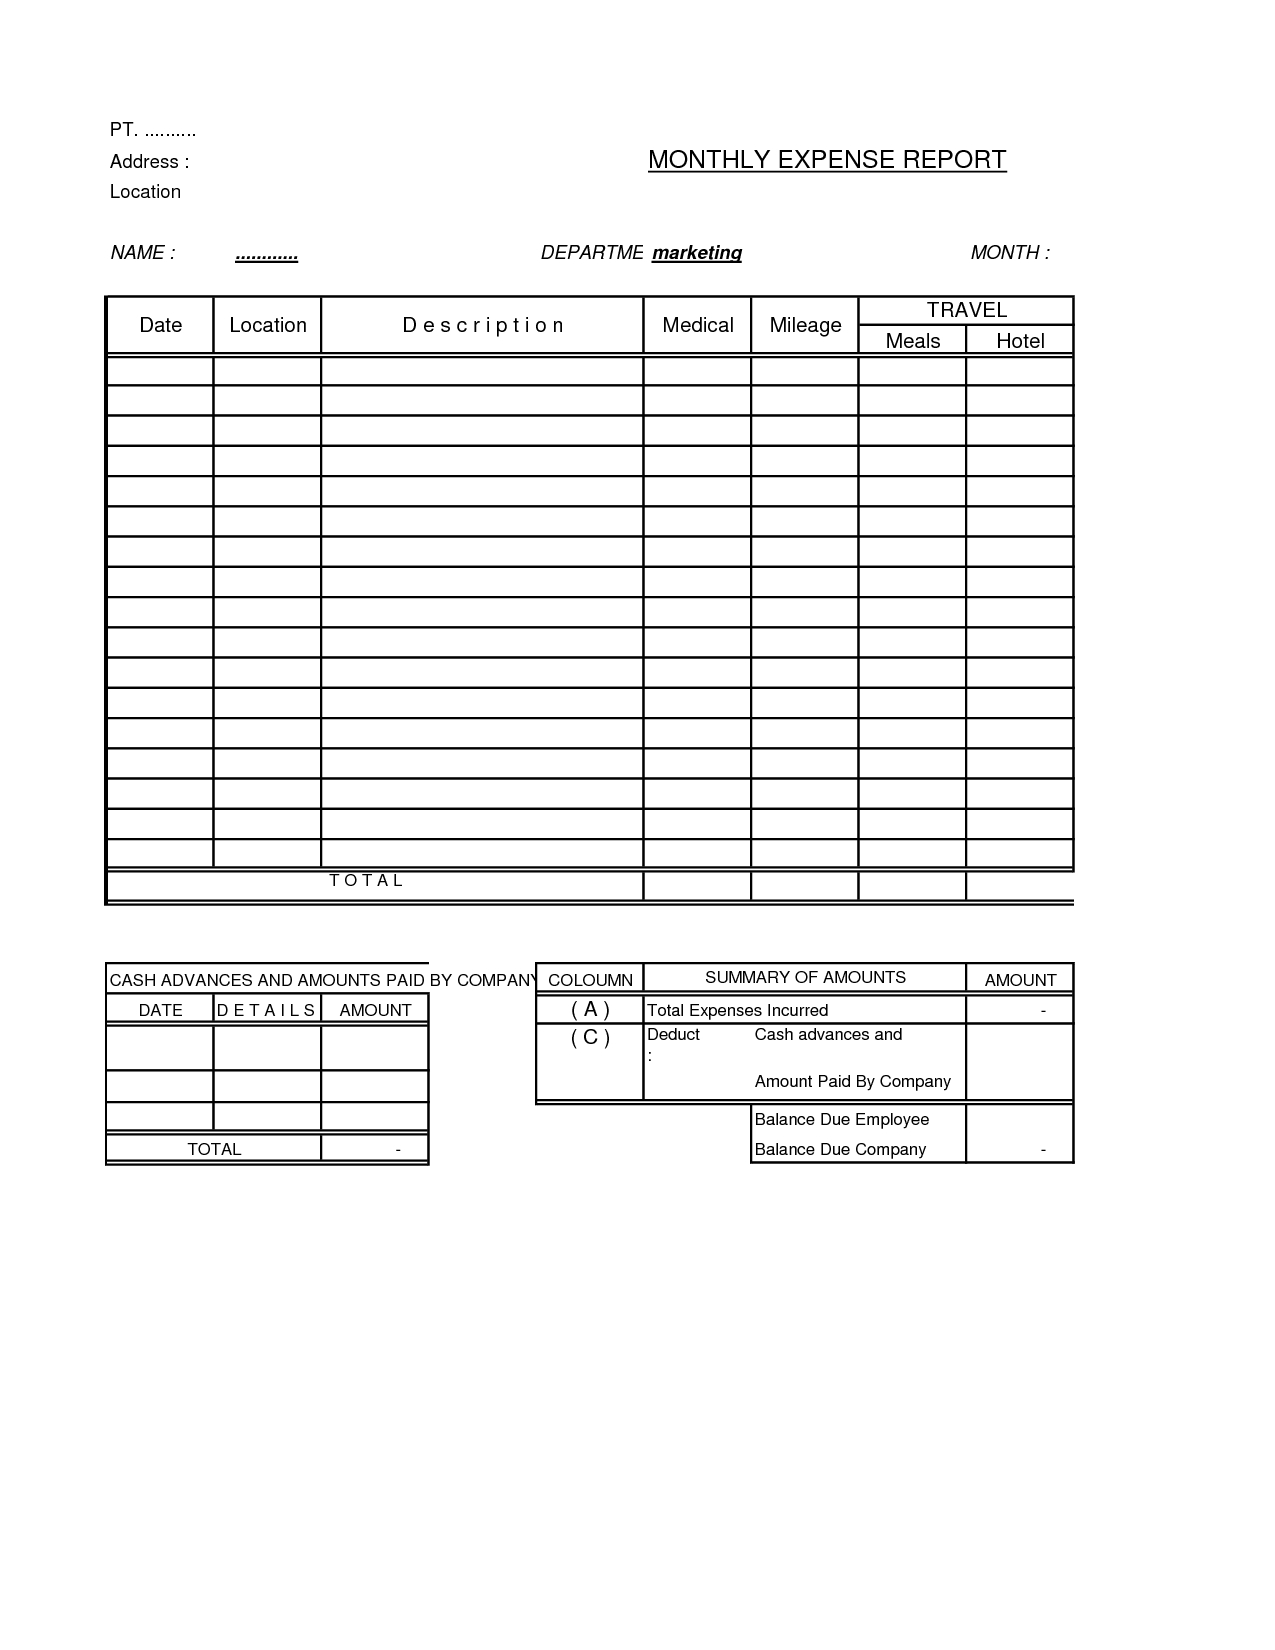 Expense Report Form And Samples For Your Inspirations Intended For Monthly Expense Report Template Excel